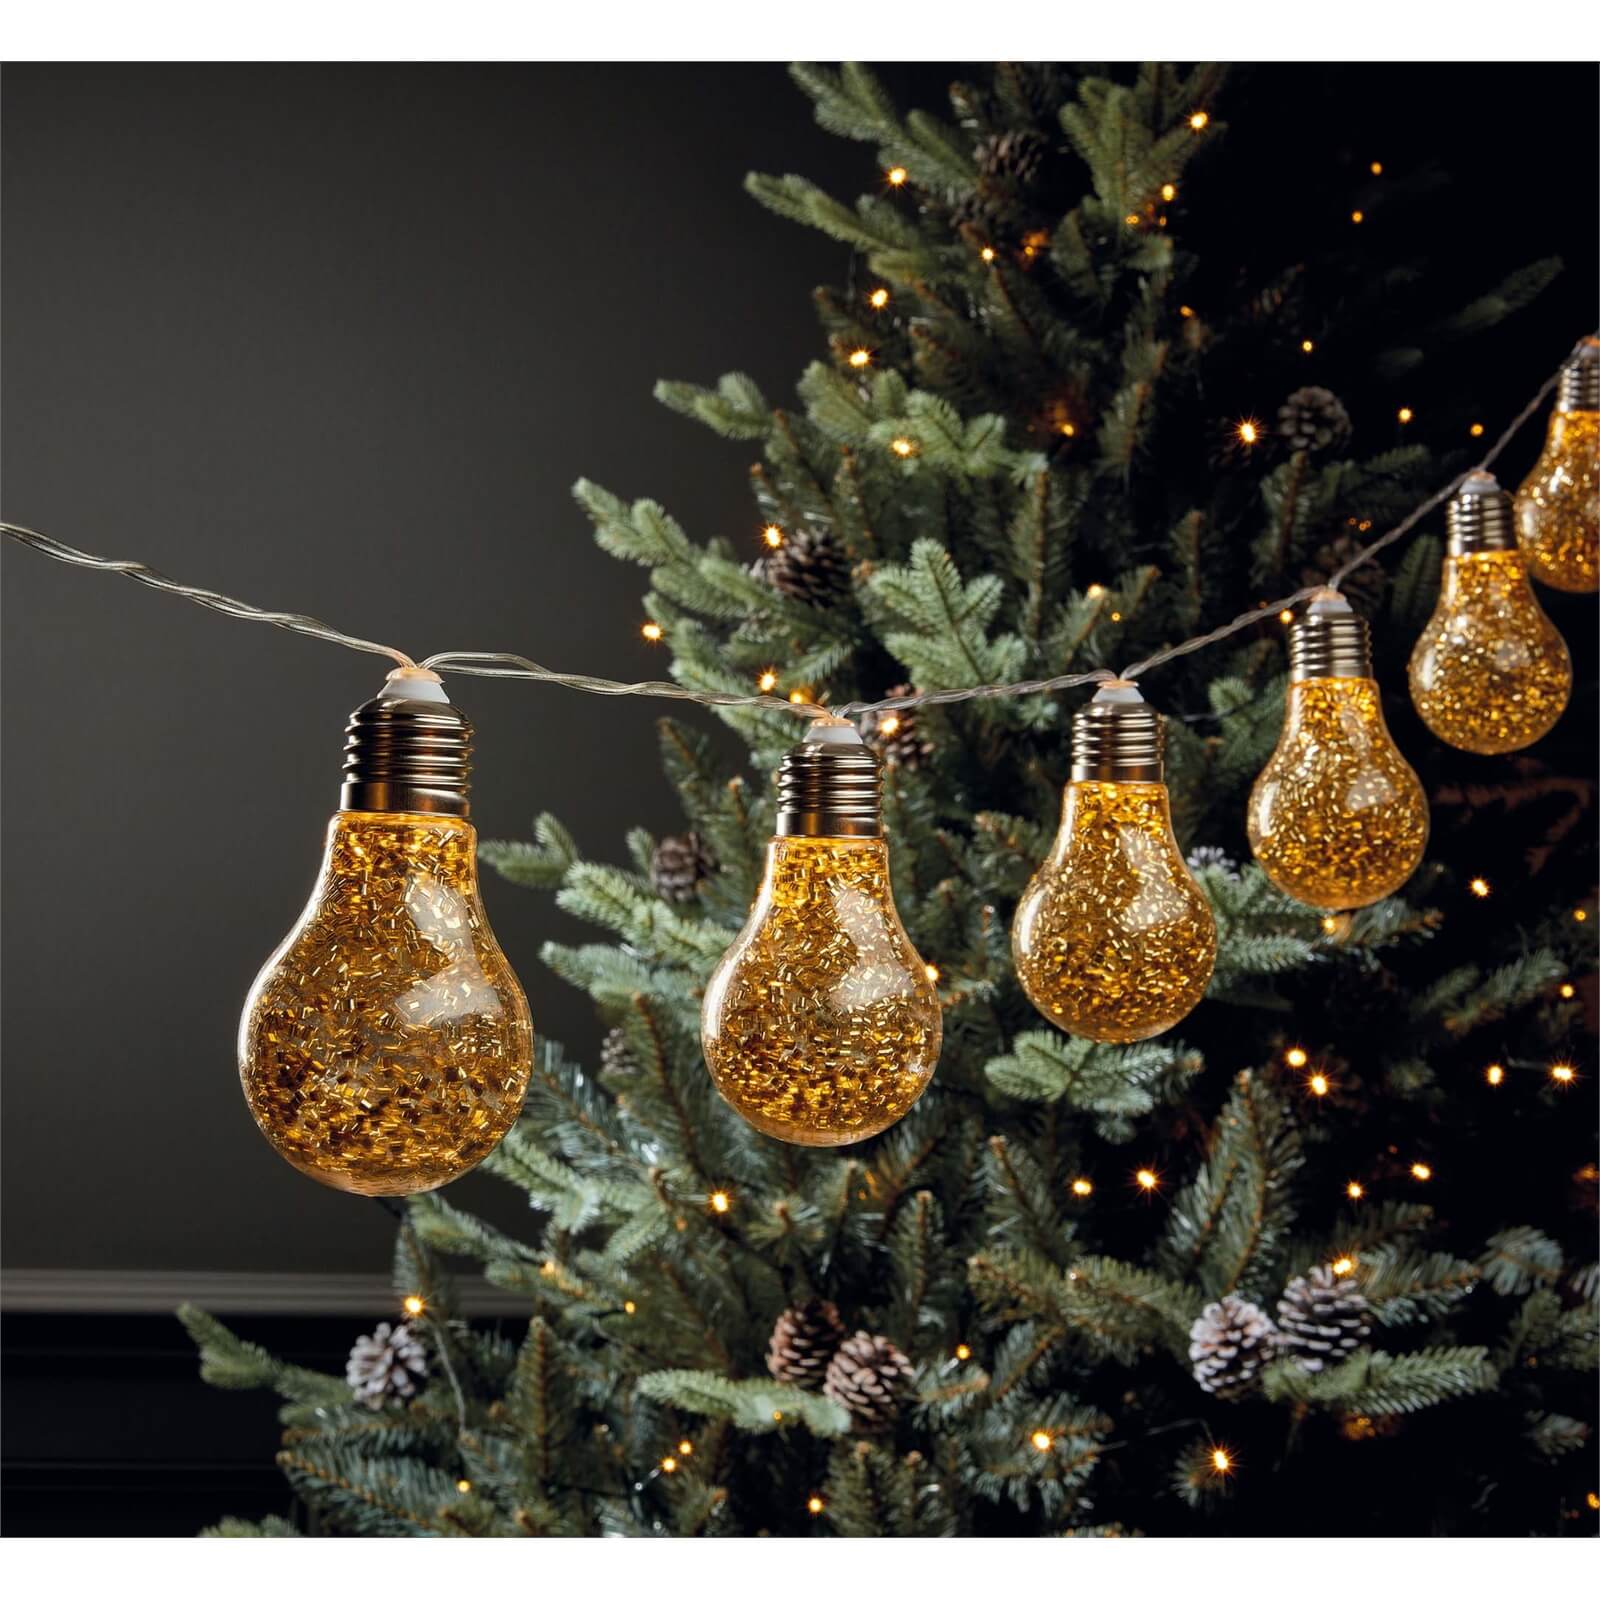 10 Gold Glitter Bulb String Lights (Battery Operated)